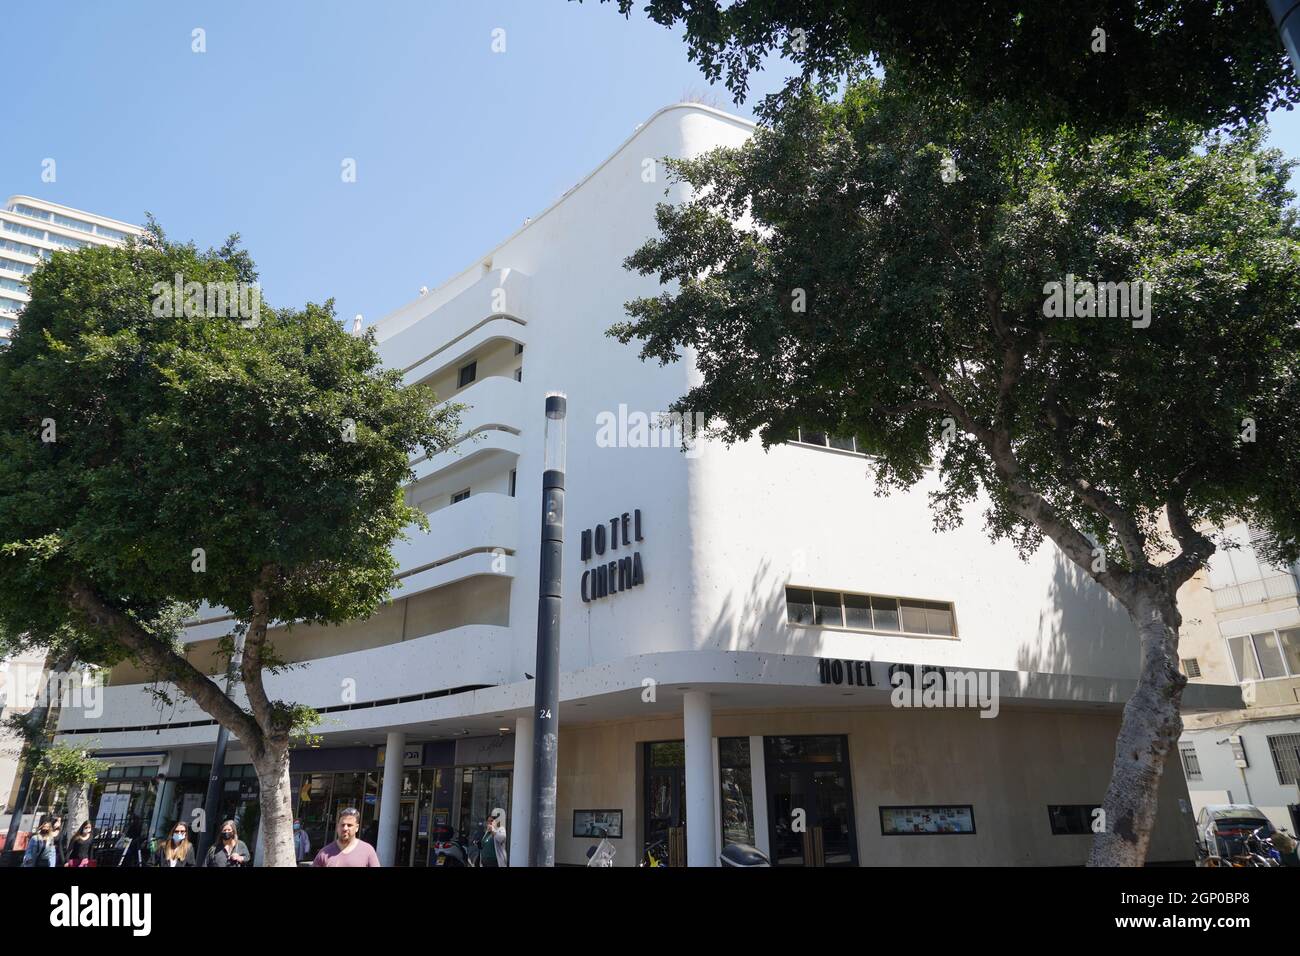 Bauhaus Architecture Hotel Cinema at Zina Dizengoff Square, in Tel Aviv White City. The White City refers to a collection of over 4,000 buildings buil Stock Photo